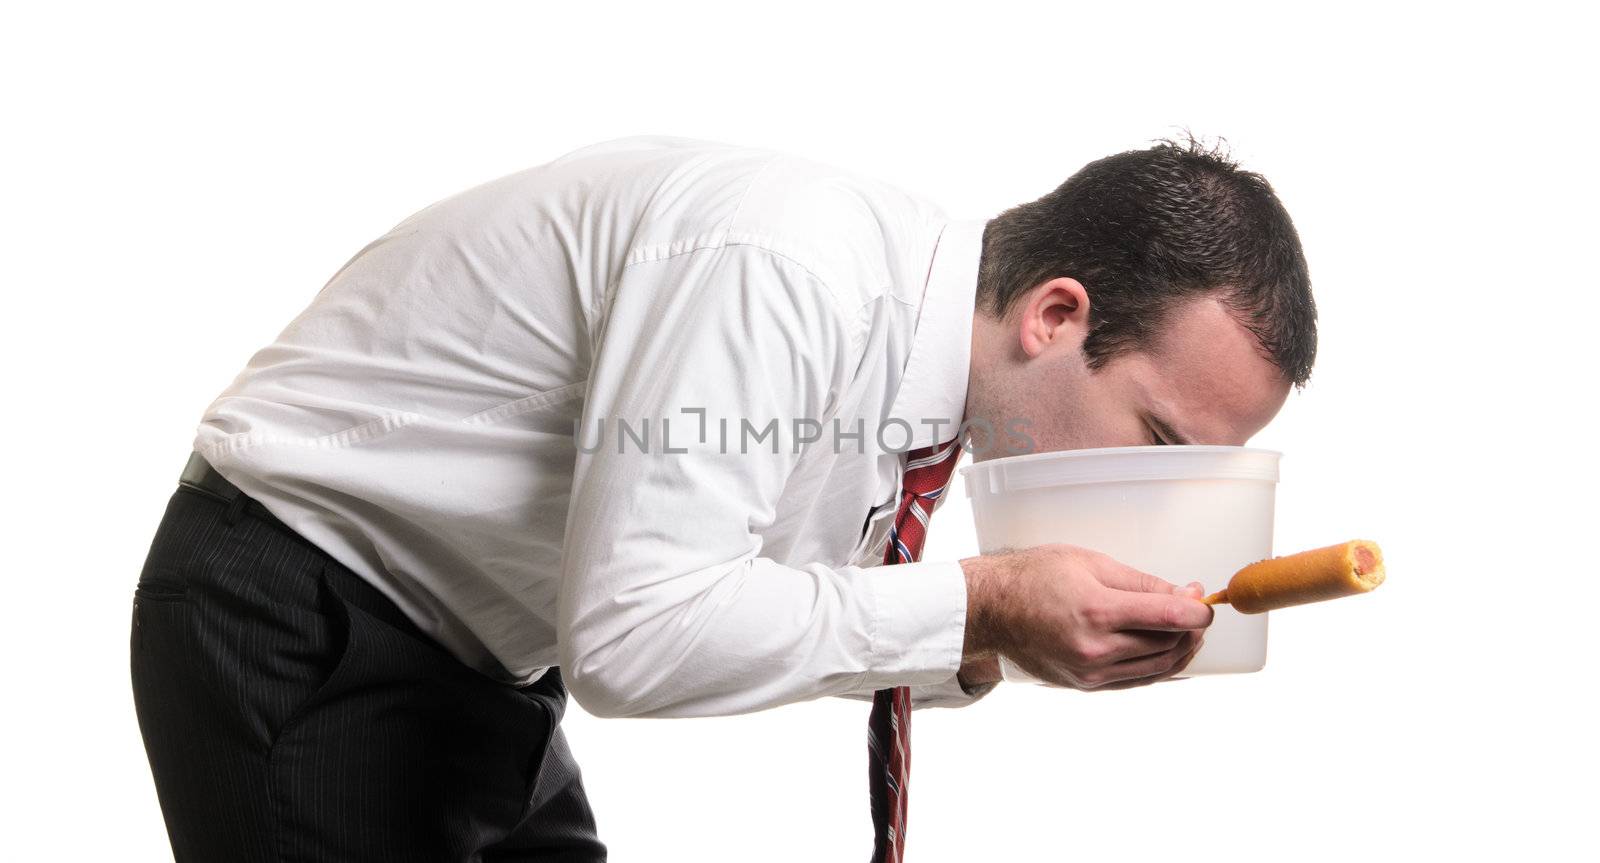 A young man is vomiting into a pail after eating a bad corn dog and getting food poisoning, isolated against a white background.